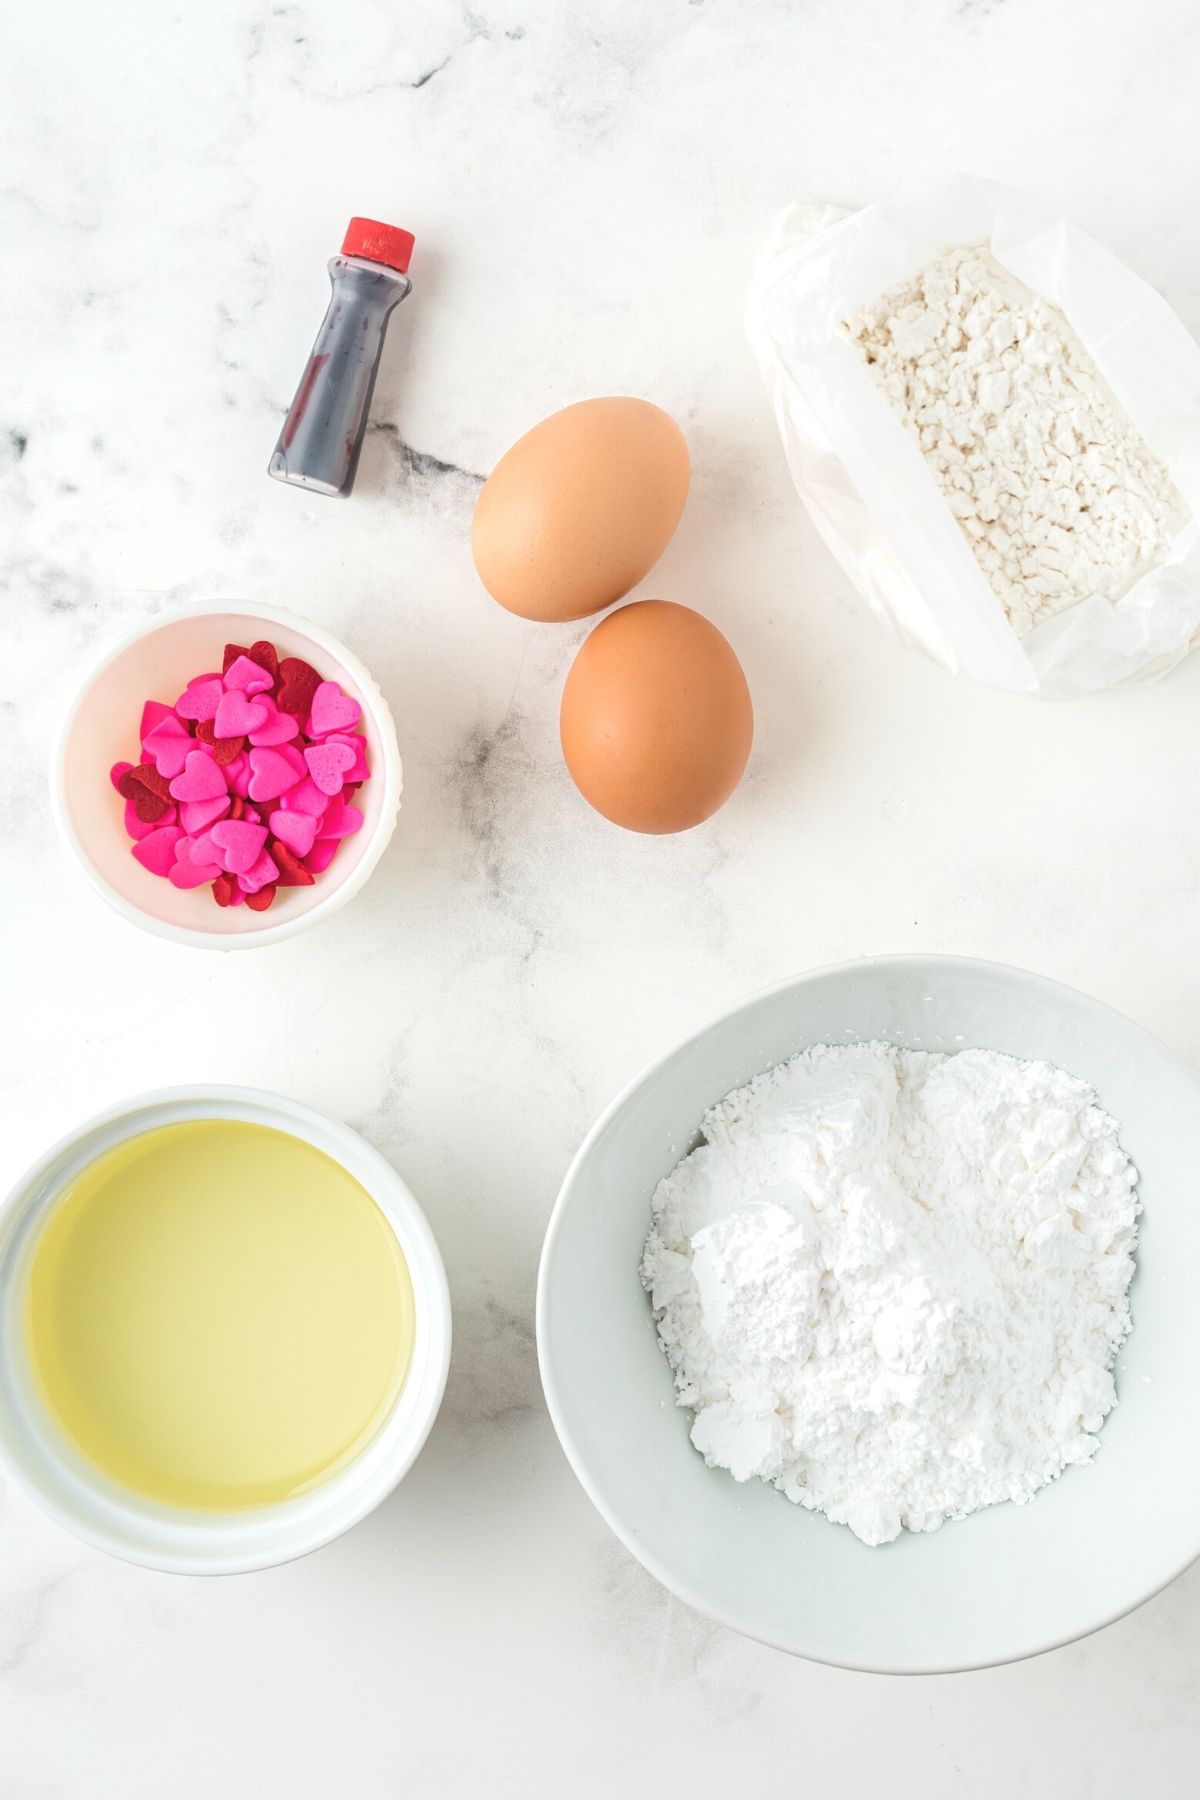 ingredients in white bowls on white marble counter: white cake mix, vegetable oil, eggs, powdered sugar, food coloring, red and pink heart sprinkles